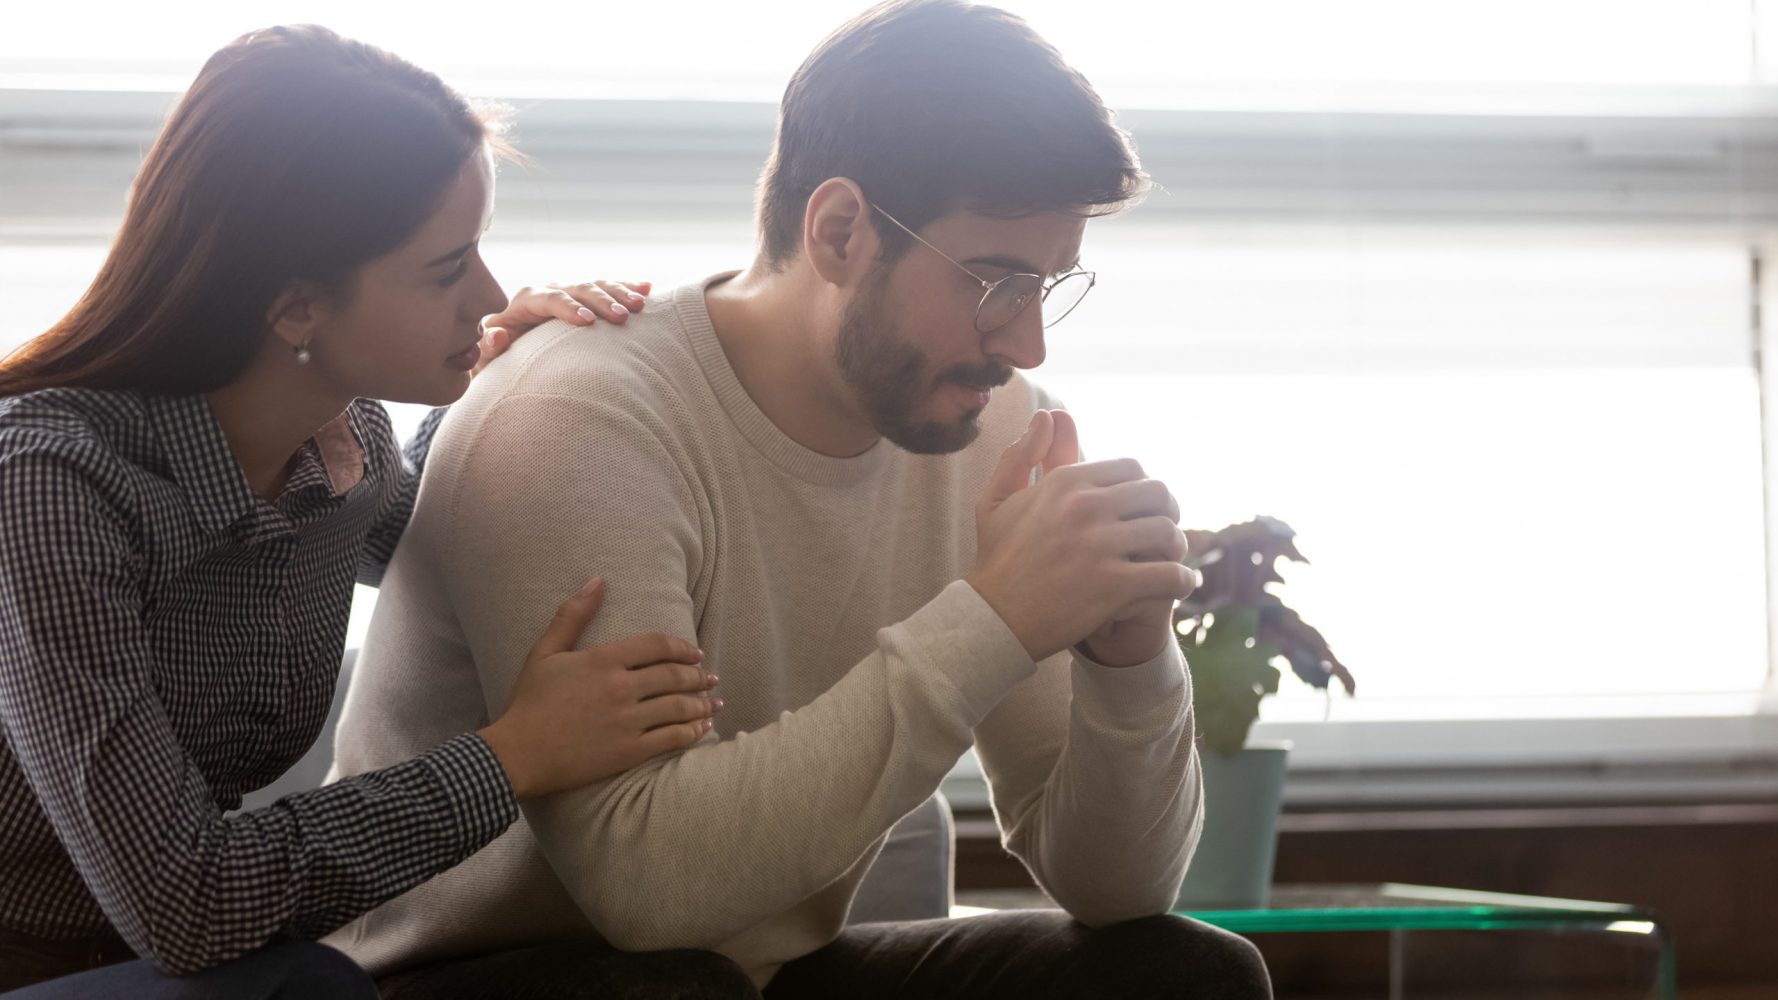 woman comforting man on couch in front of window.